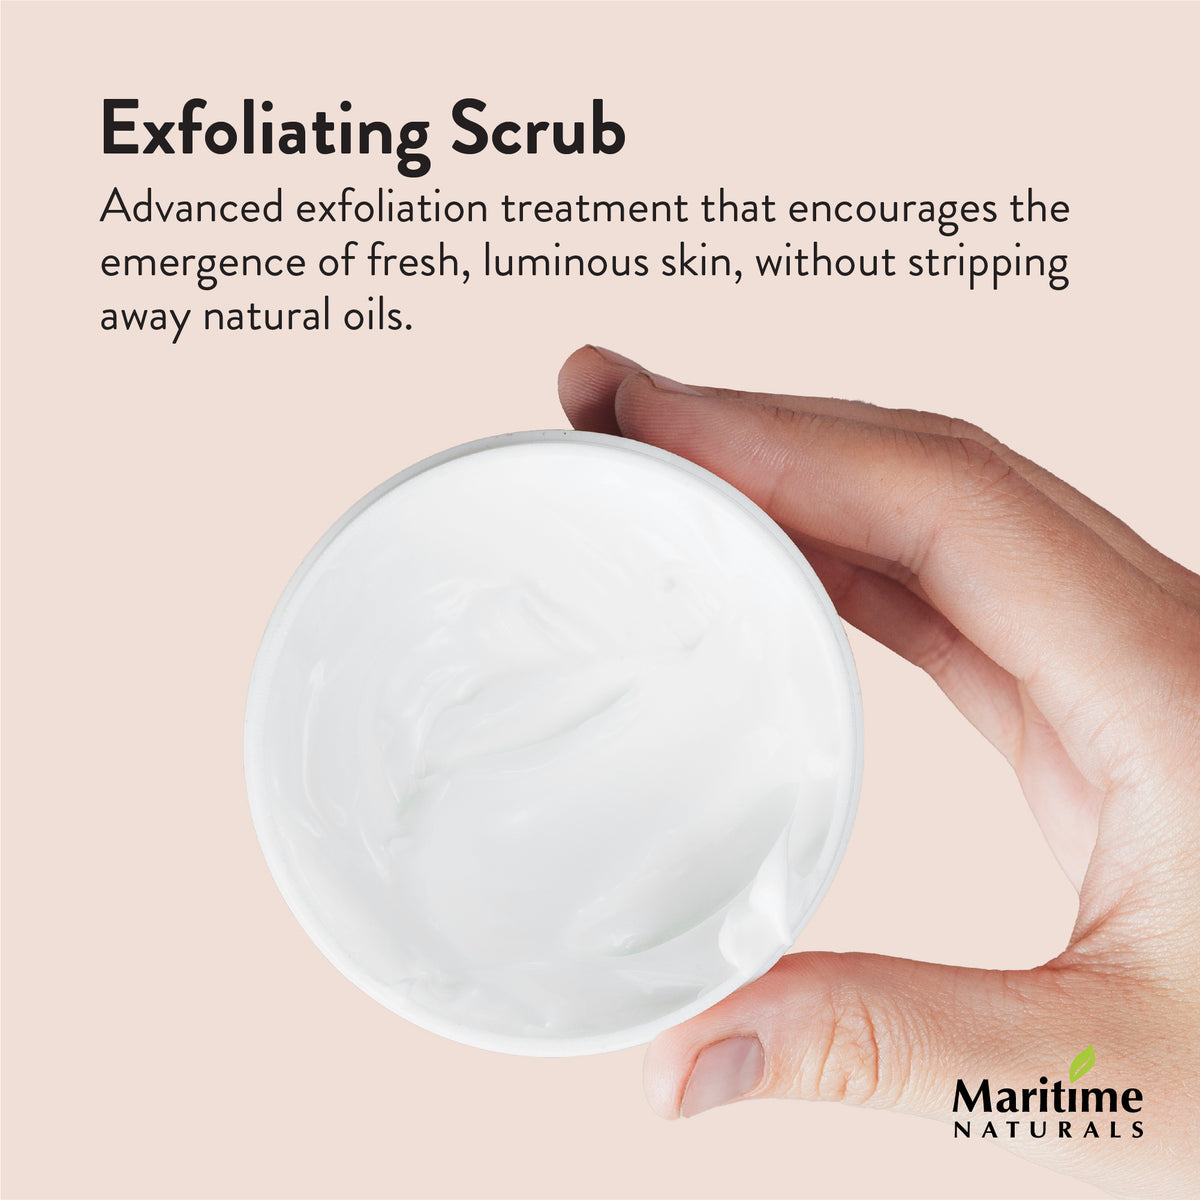 advance exfoliation treatment that encourages youthful glowing skin